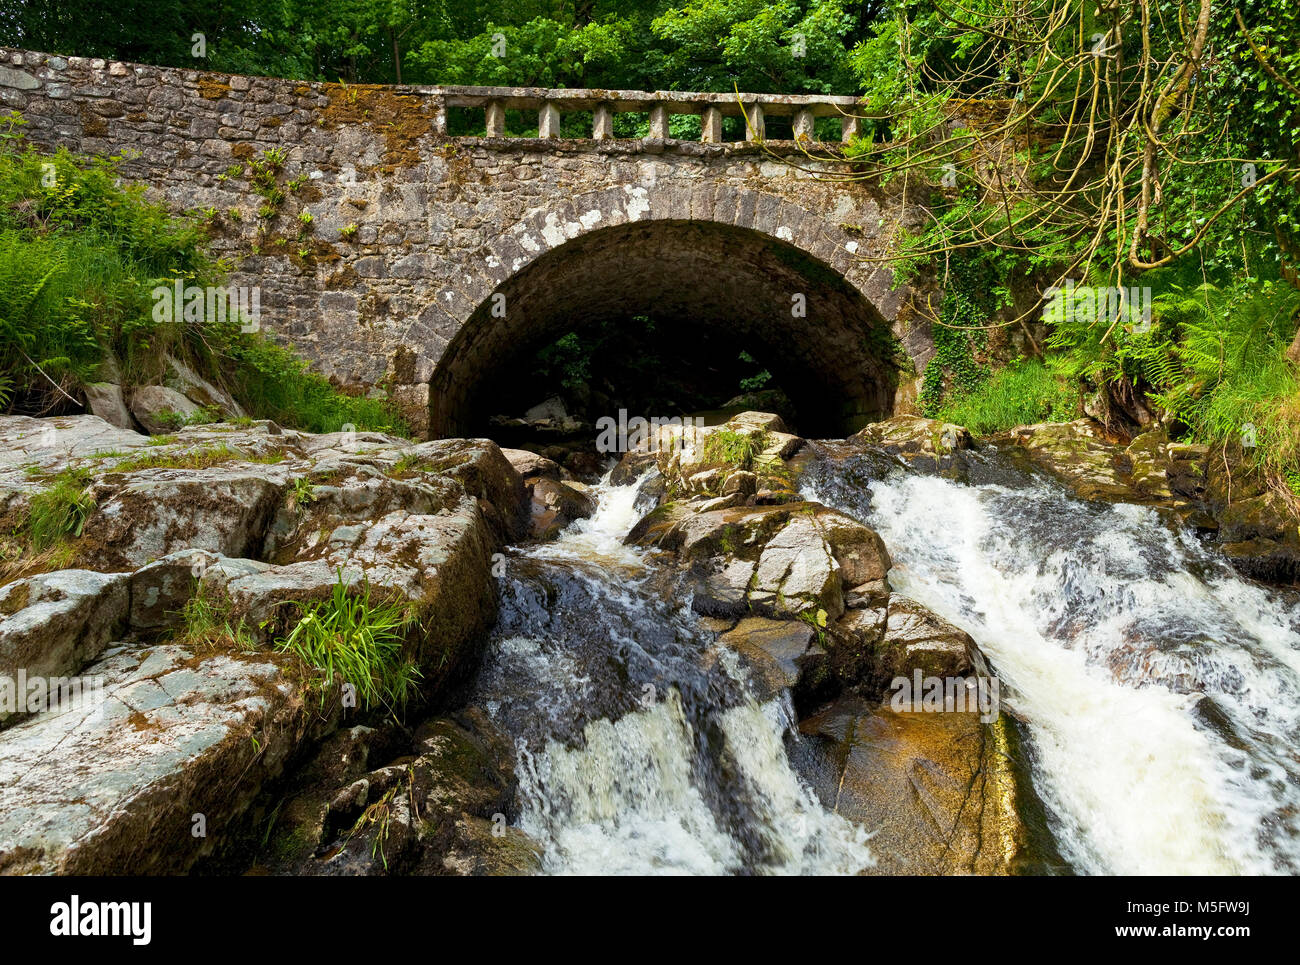 Bridge over the Shankhill River shortly before in joins the River Liffey, near Clogleagh, County Wicklow, Ireland Stock Photo